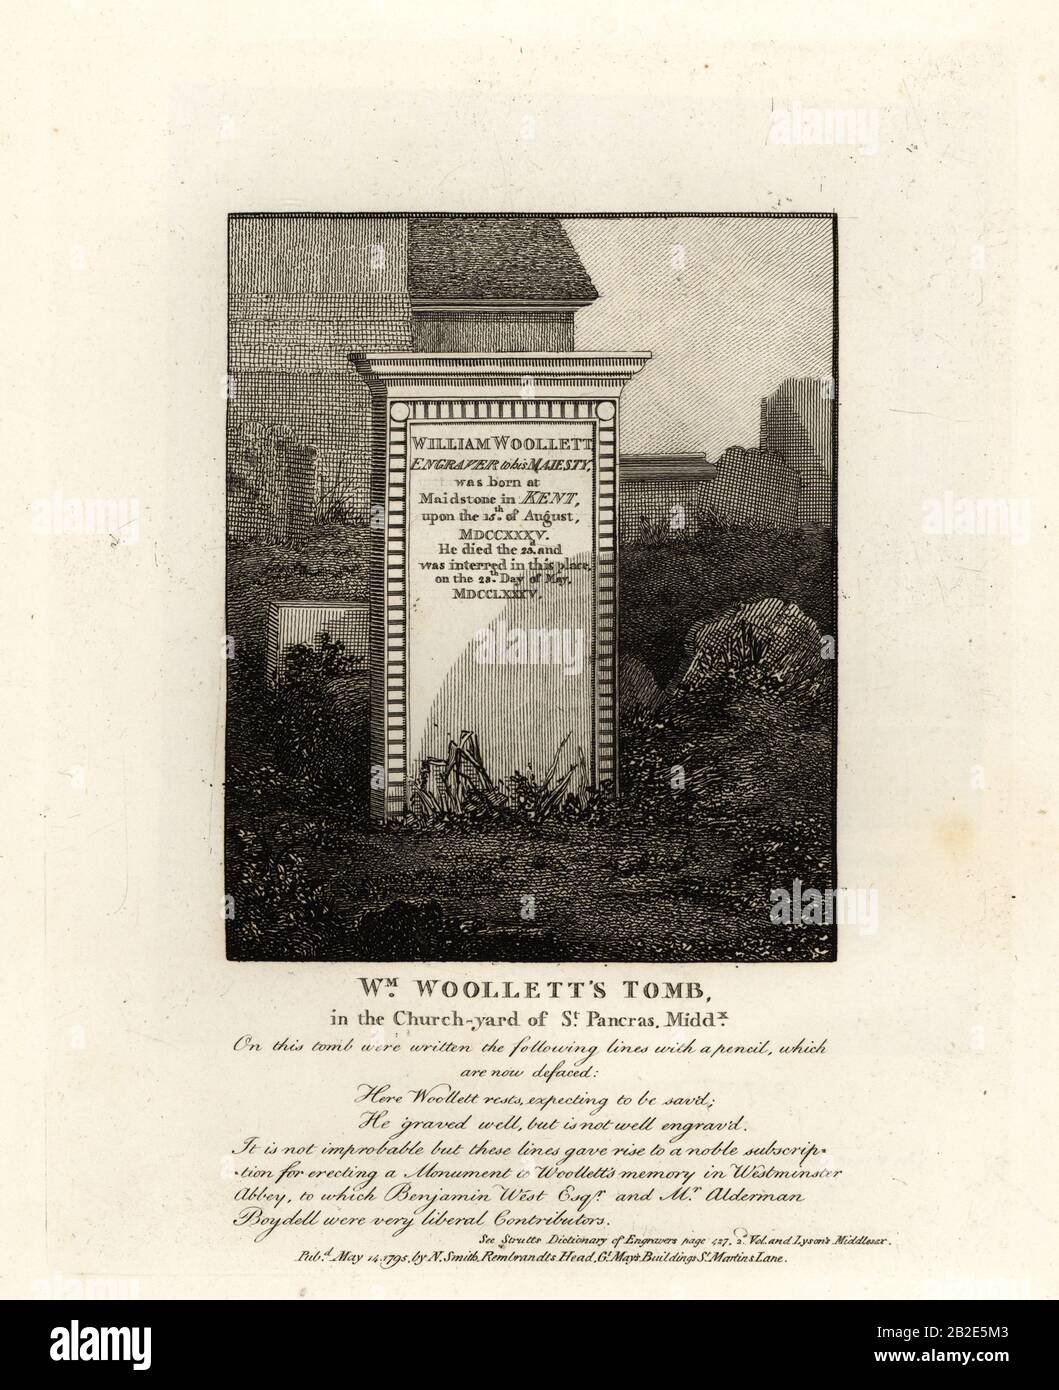 Tomb of royal engraver William Woollett, died 1735, in the churchyard of St. Pancras, Middlesex. Copperplate engraving by John Thomas Smith after original drawings by members of the Society of Antiquaries from his J.T. Smith’s Antiquities of London and its Environs, J. Sewell, R. Folder, J. Simco, London, 1795. Stock Photo